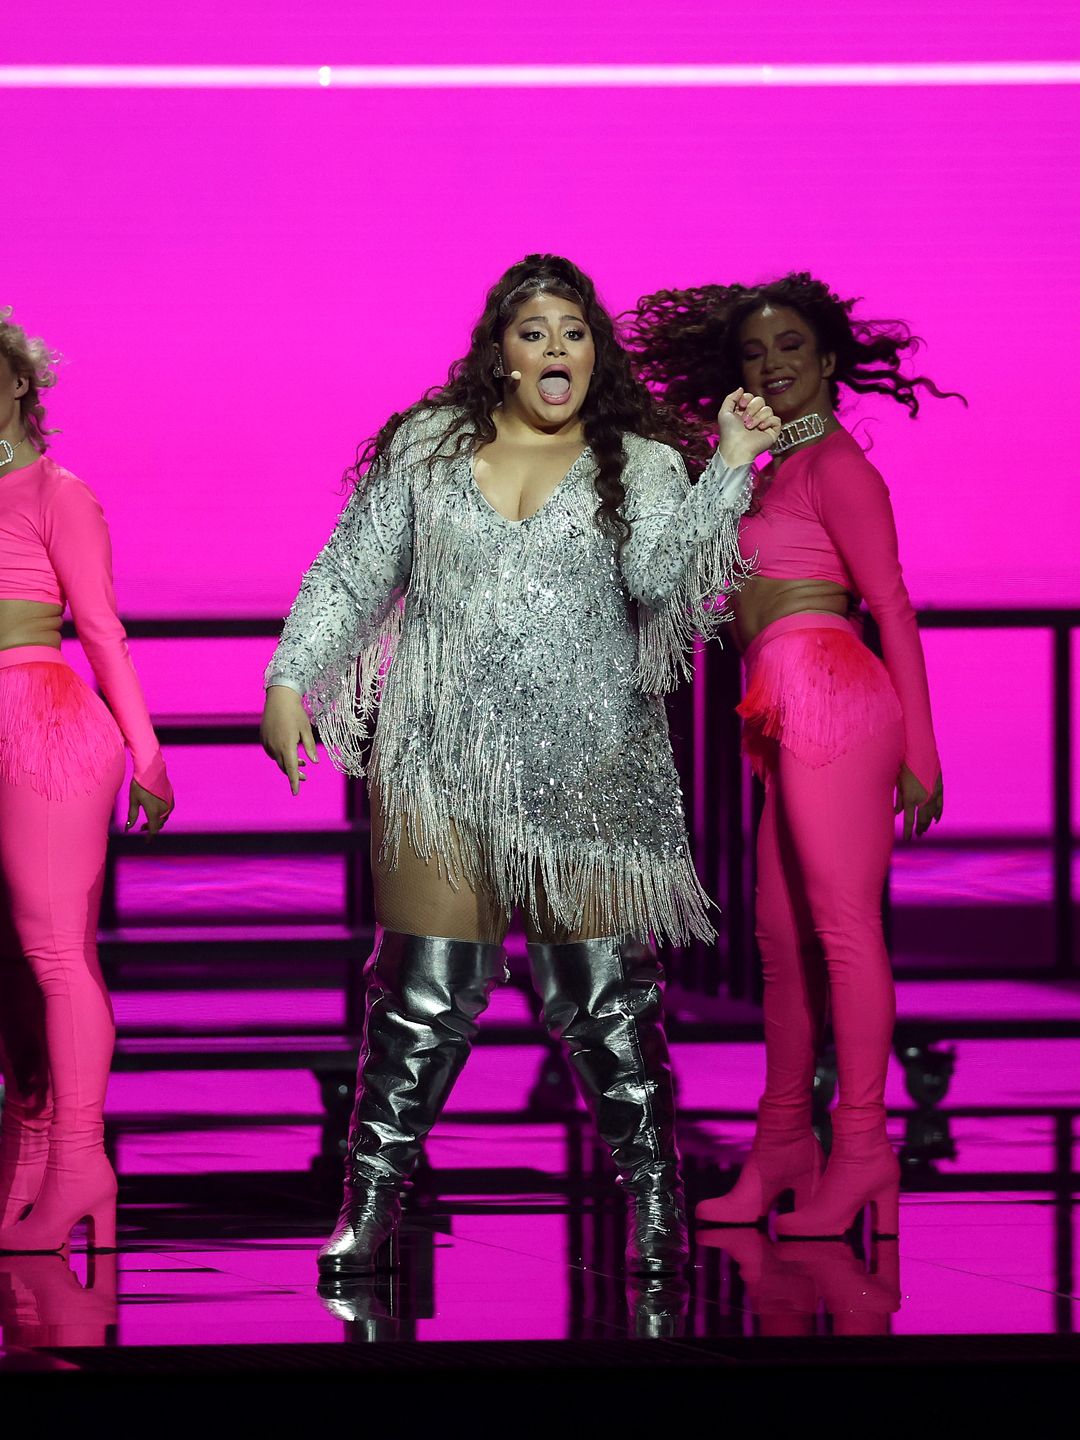 Destiny Chukunyere 'Destiny' of Malta during the 65th Eurovision Song Contest grand final held at Rotterdam Ahoy on May 21, 2021